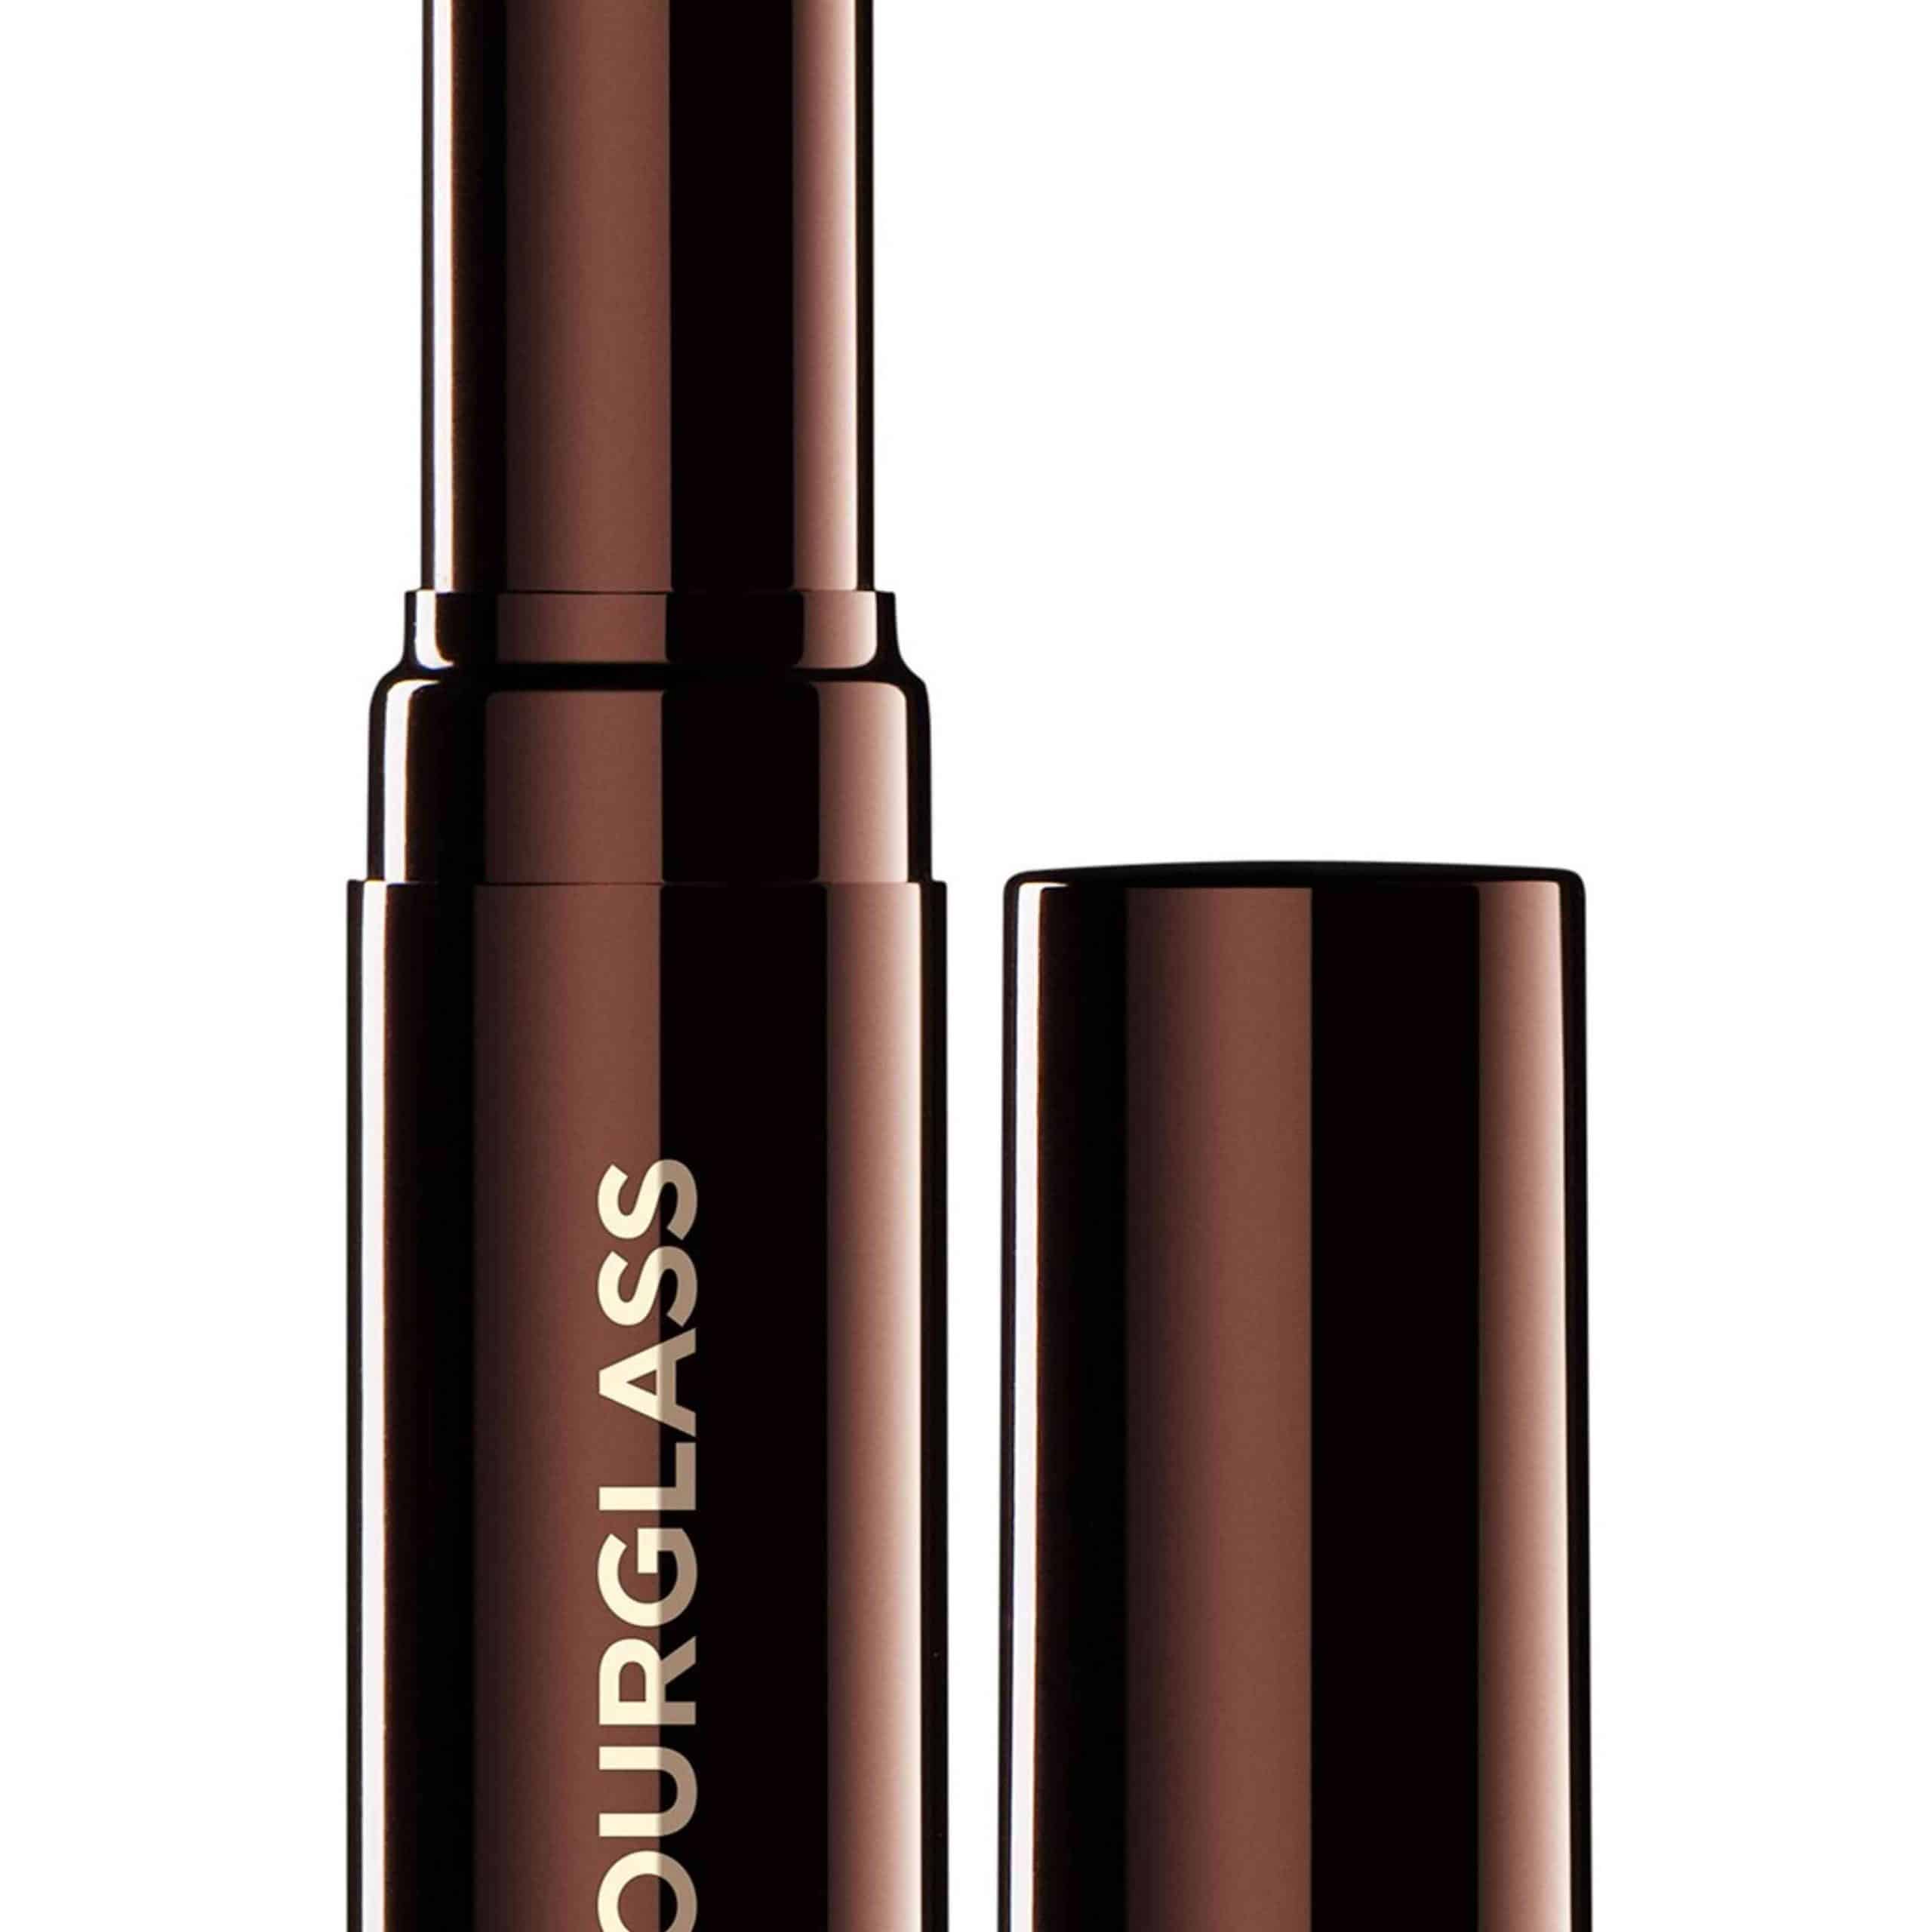 The 9 Best Concealers for Oily Skin of 2020